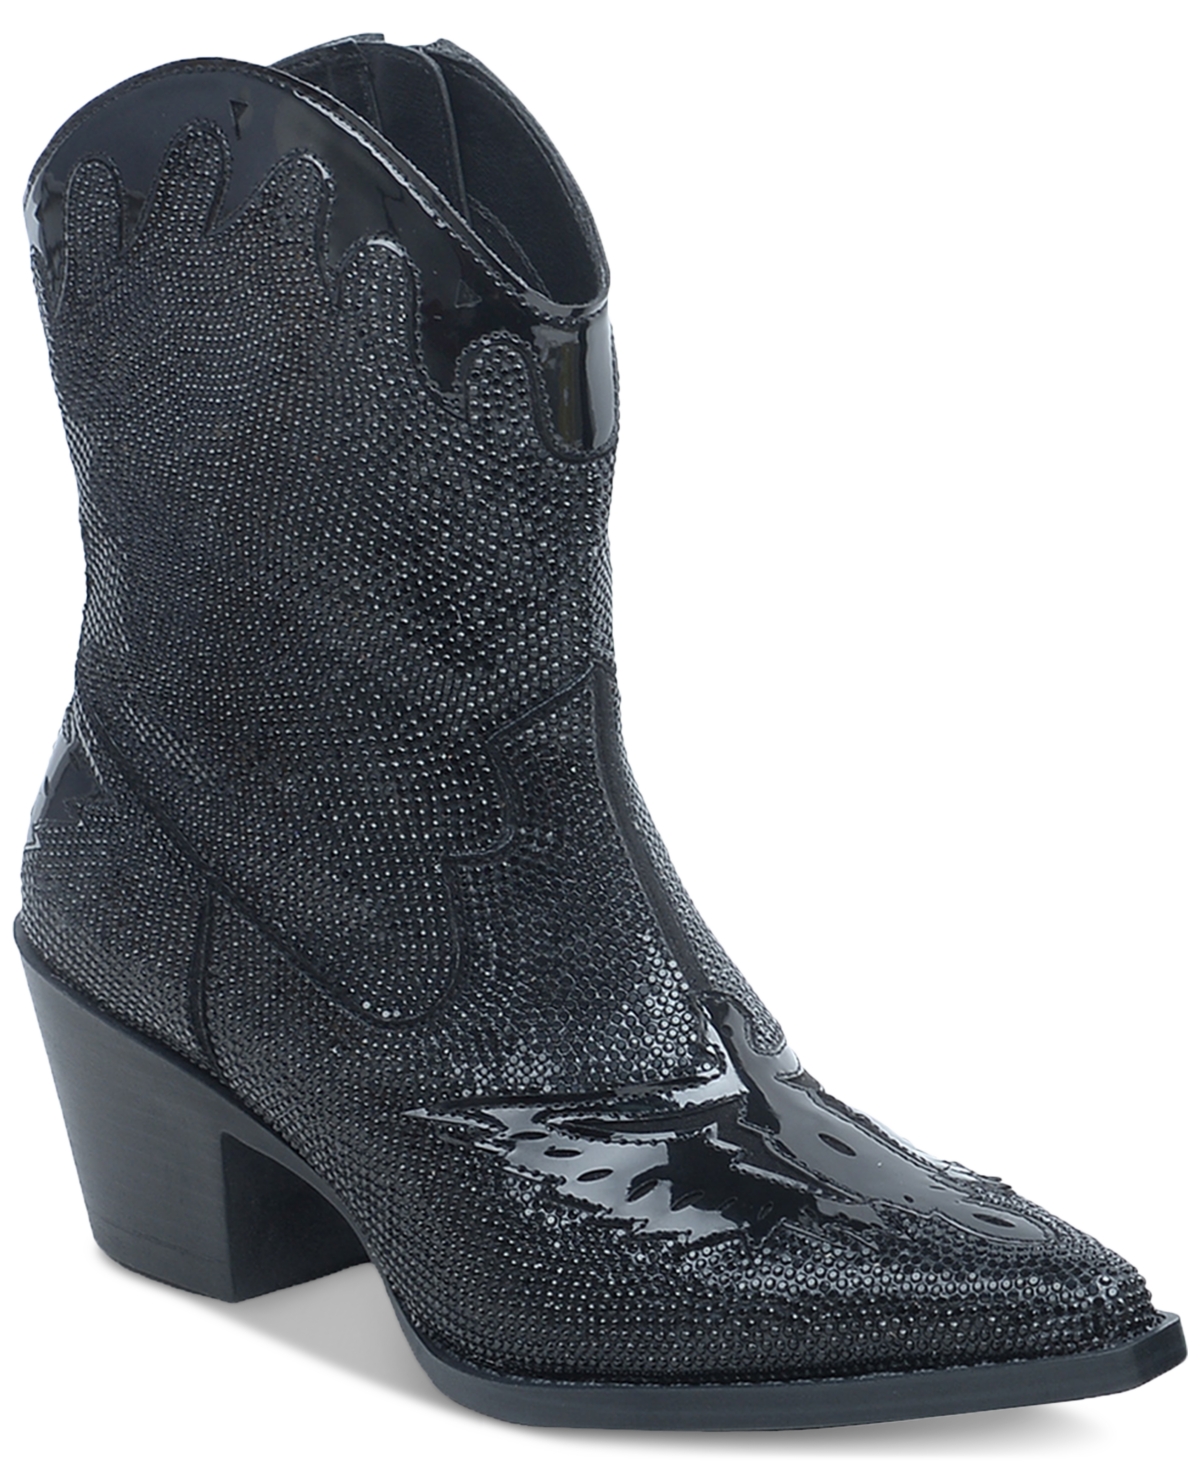 Lourdez Embellished Cowboy Booties, Created for Macy's - Pink Bling